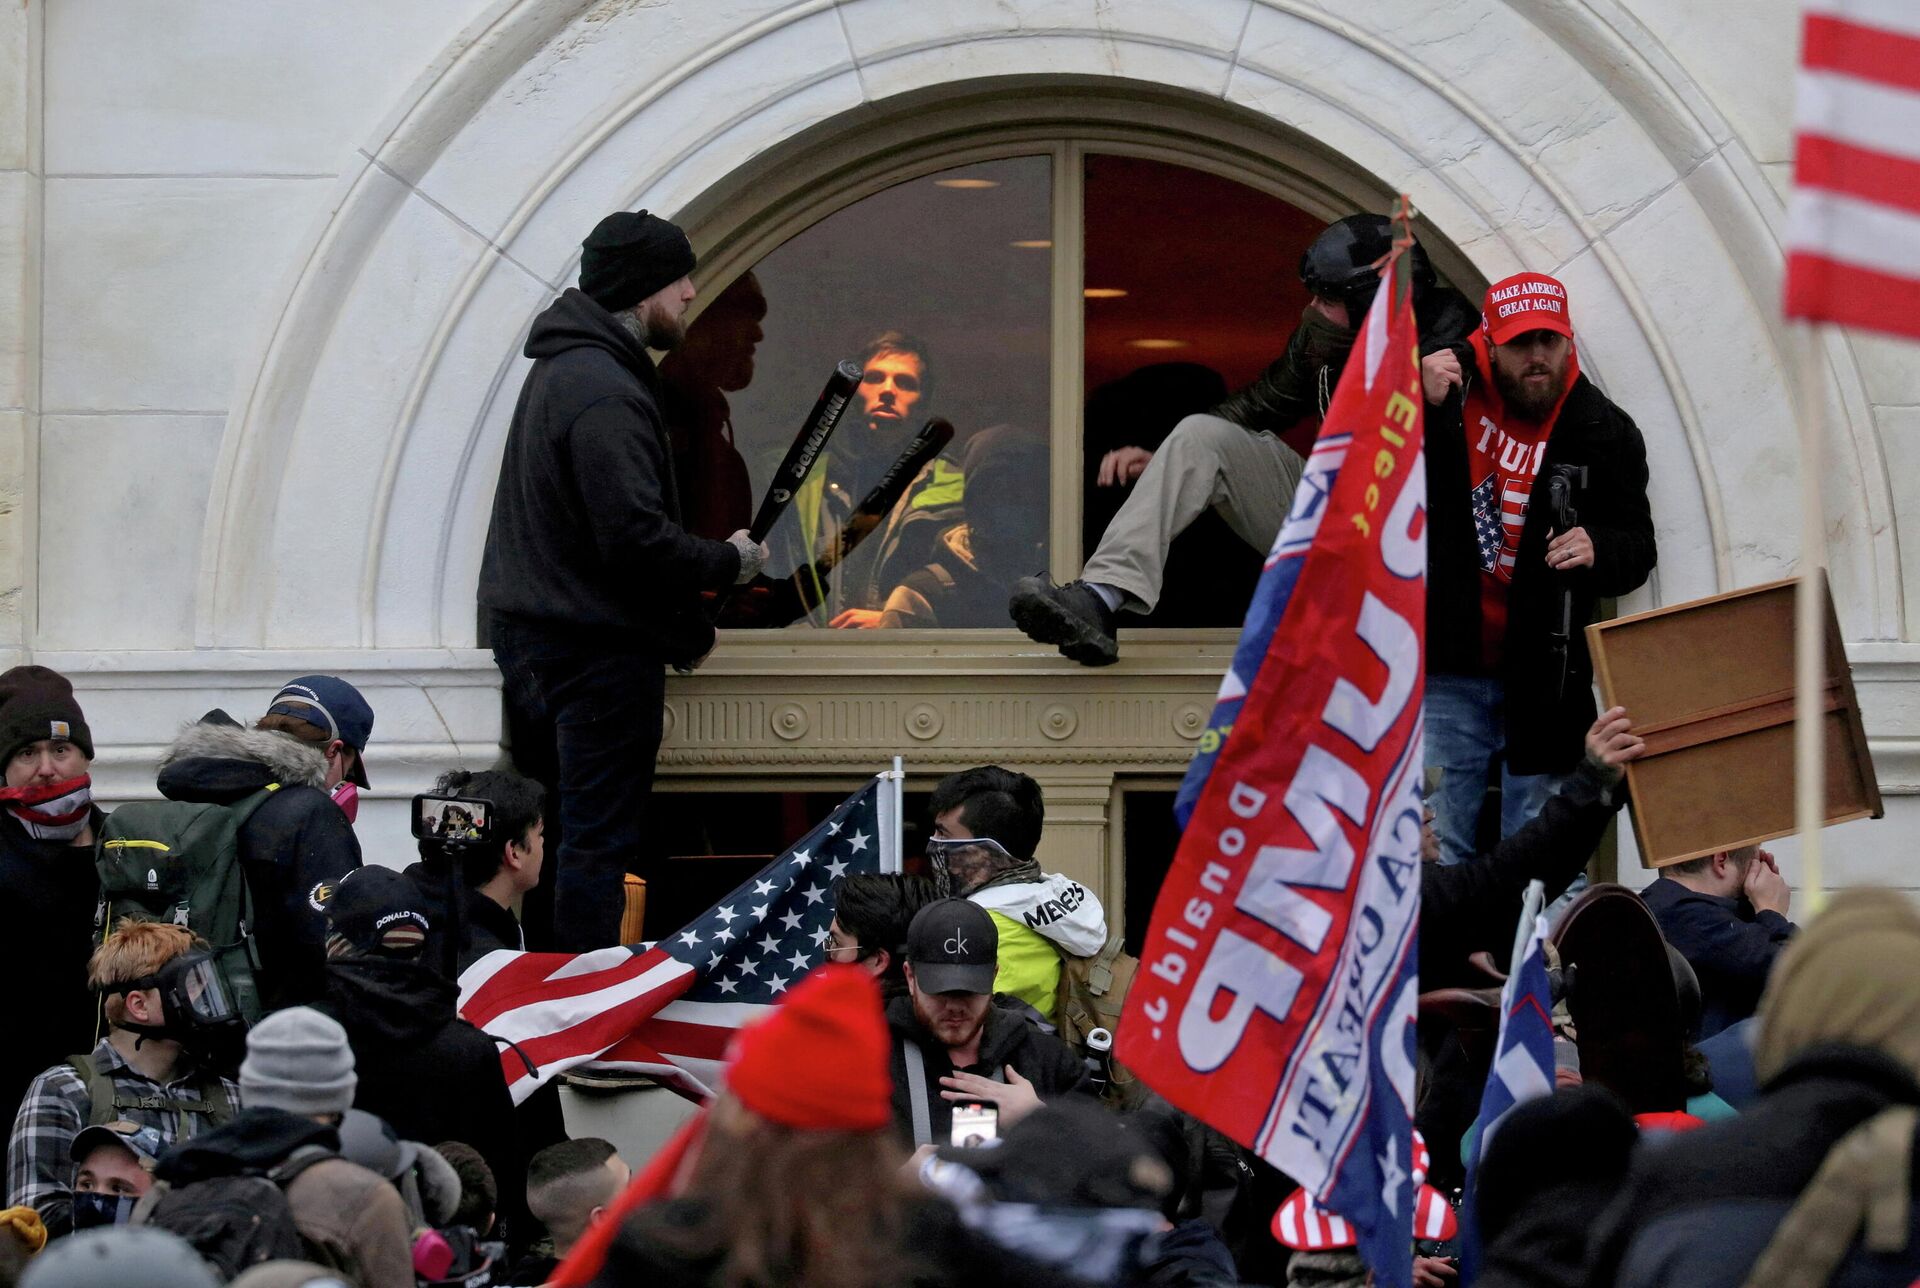 A mob of supporters of then-U.S. President Donald Trump climb through a window they broke as they storm the U.S. Capitol Building in Washington, U.S., January 6, 2021 - Sputnik International, 1920, 15.01.2022